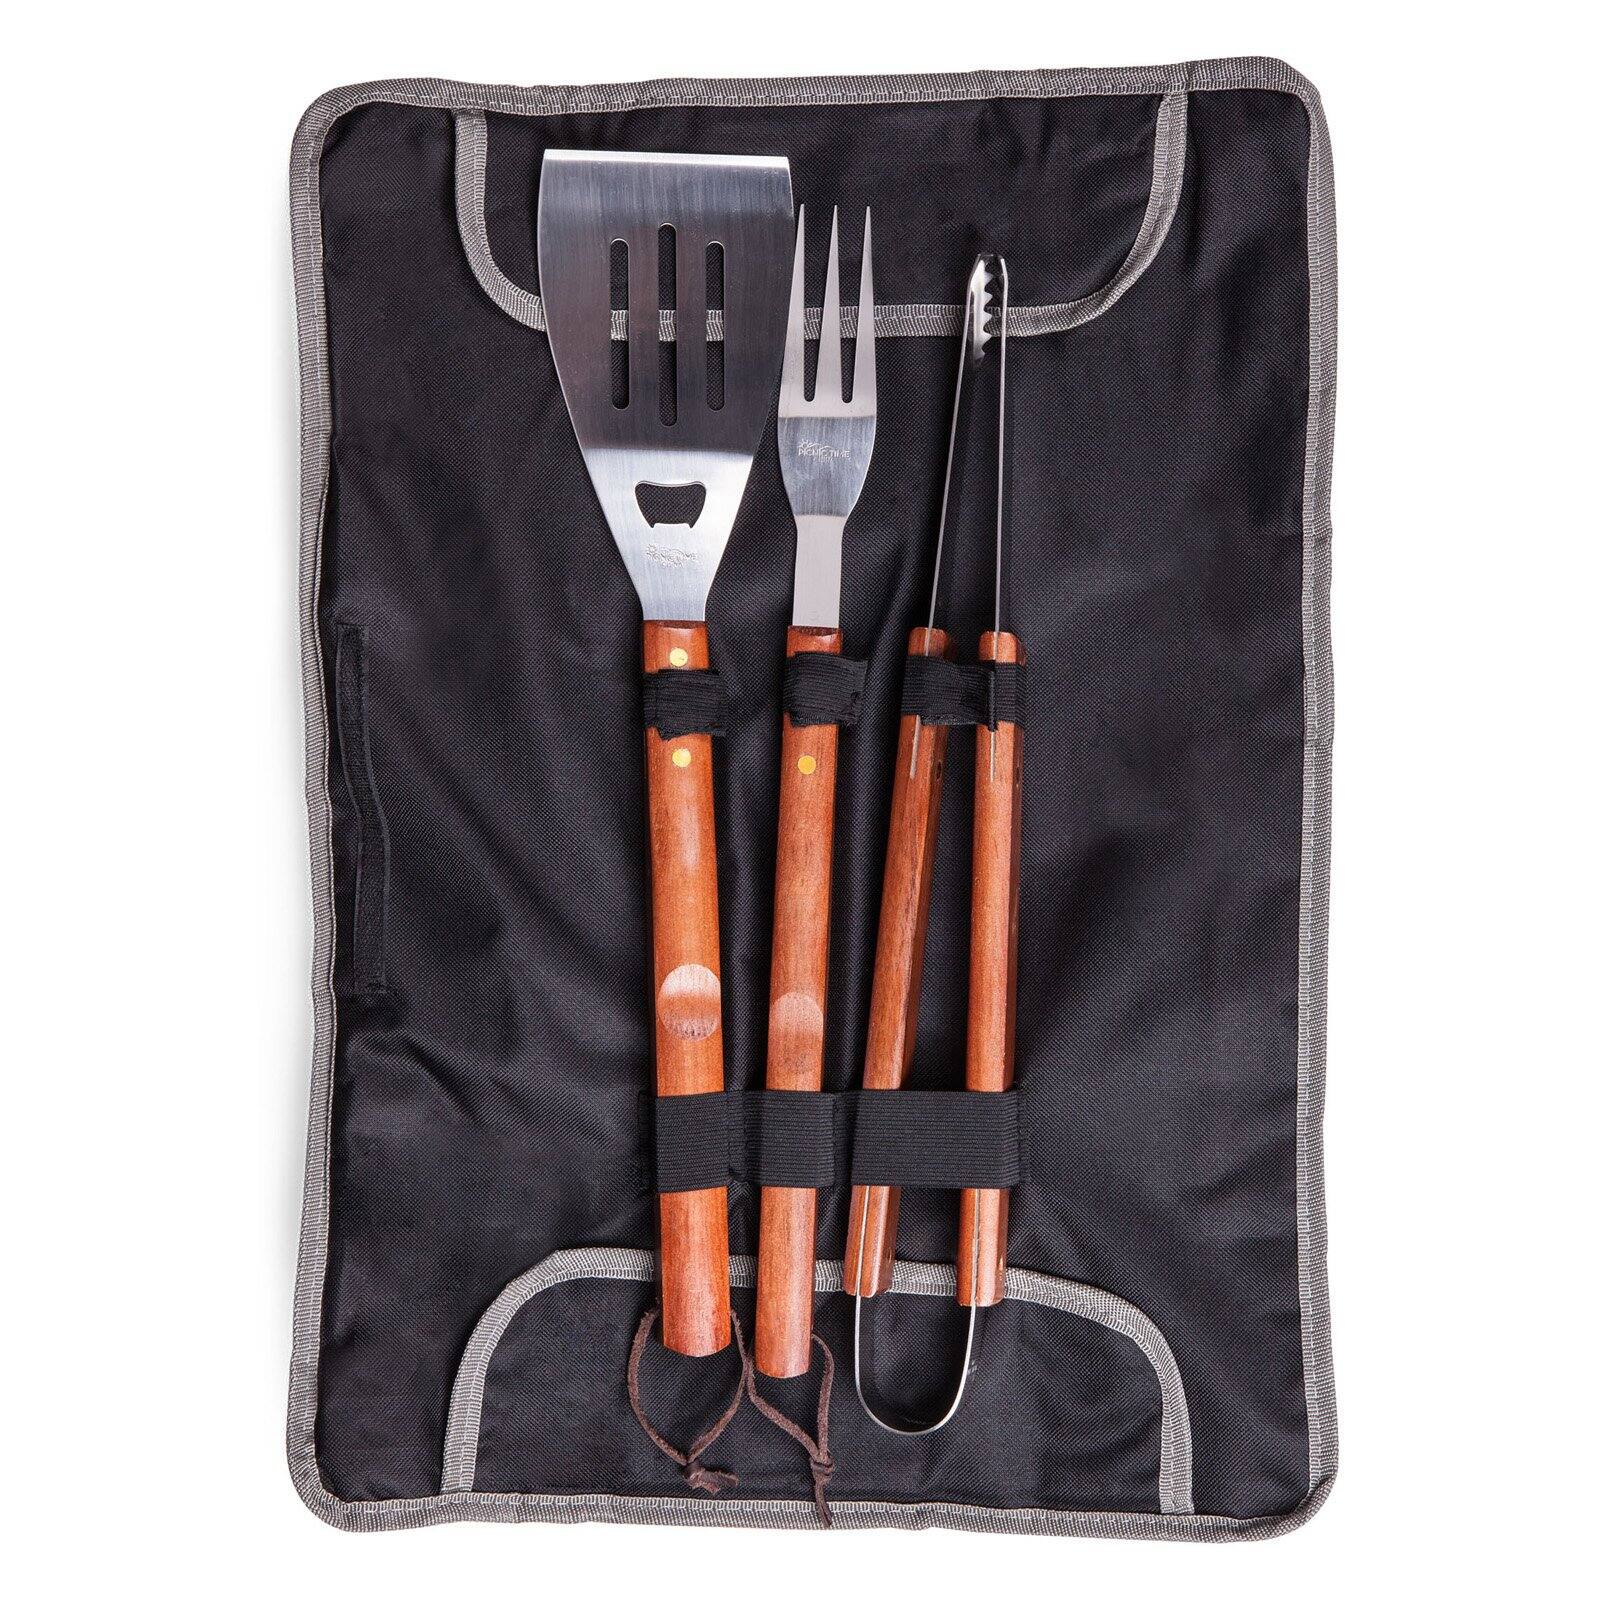 Oniva 3 Piece BBQ Tote and Tool Set - image 2 of 5